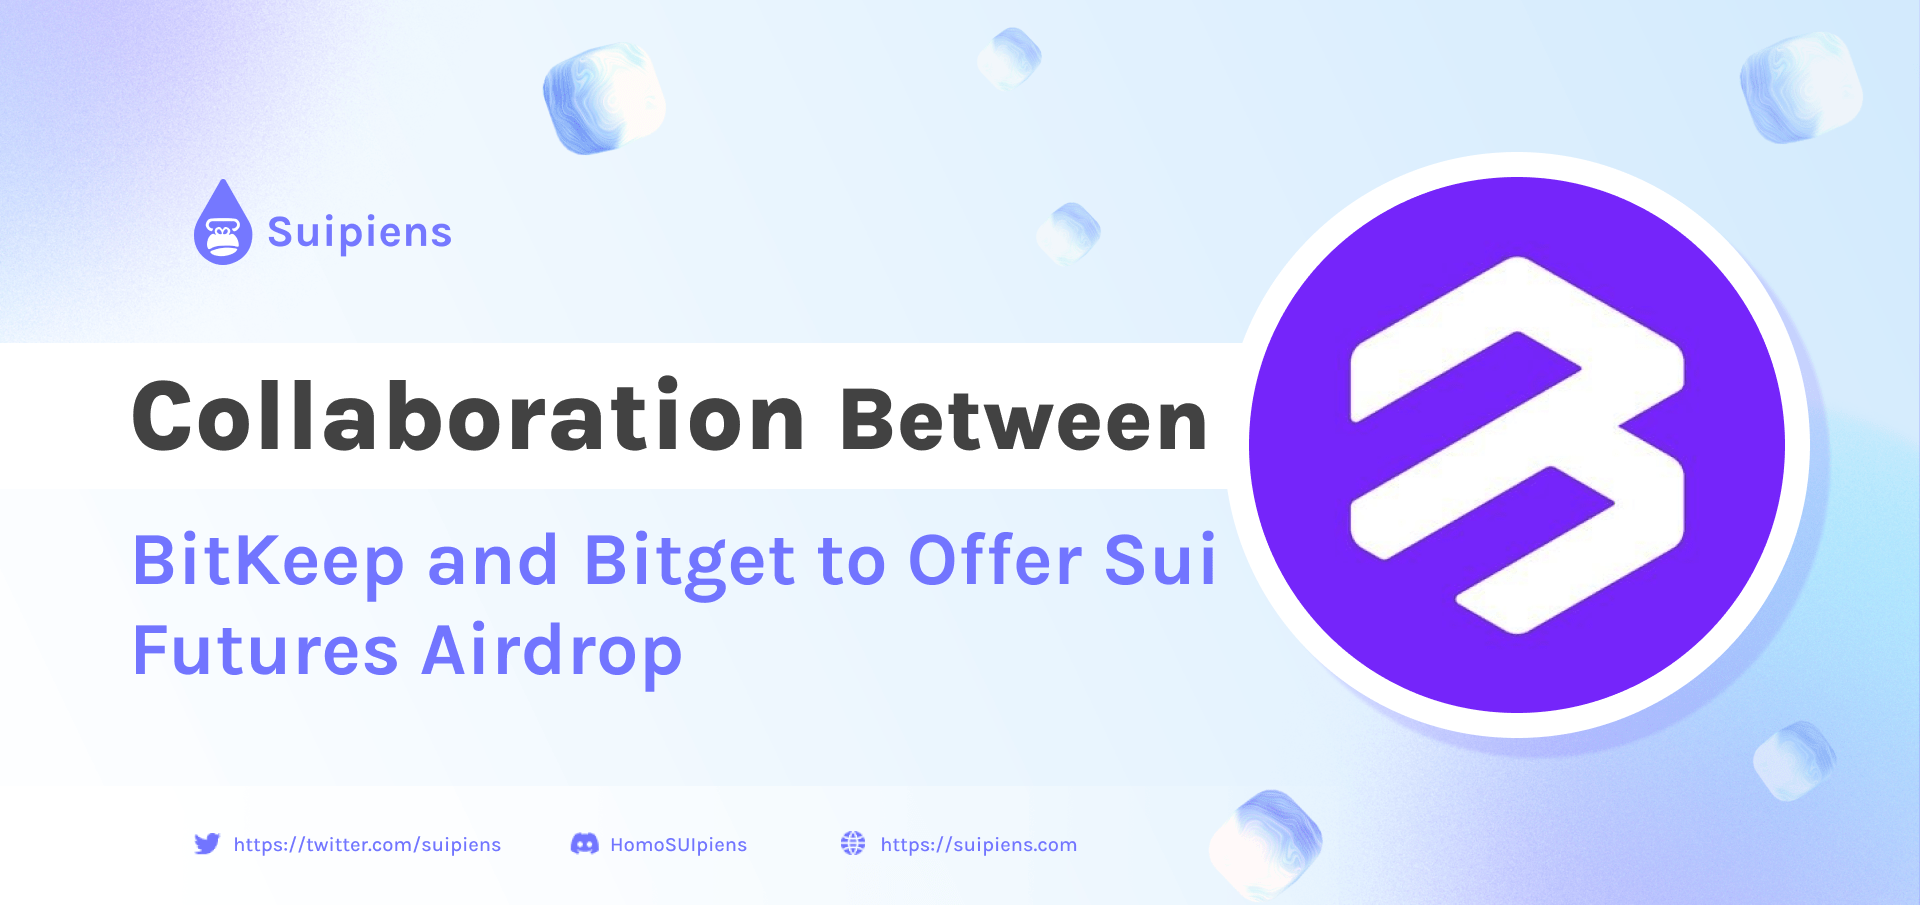 Collaboration Between BitKeep and Bitget to Offer Sui Futures Airdrop